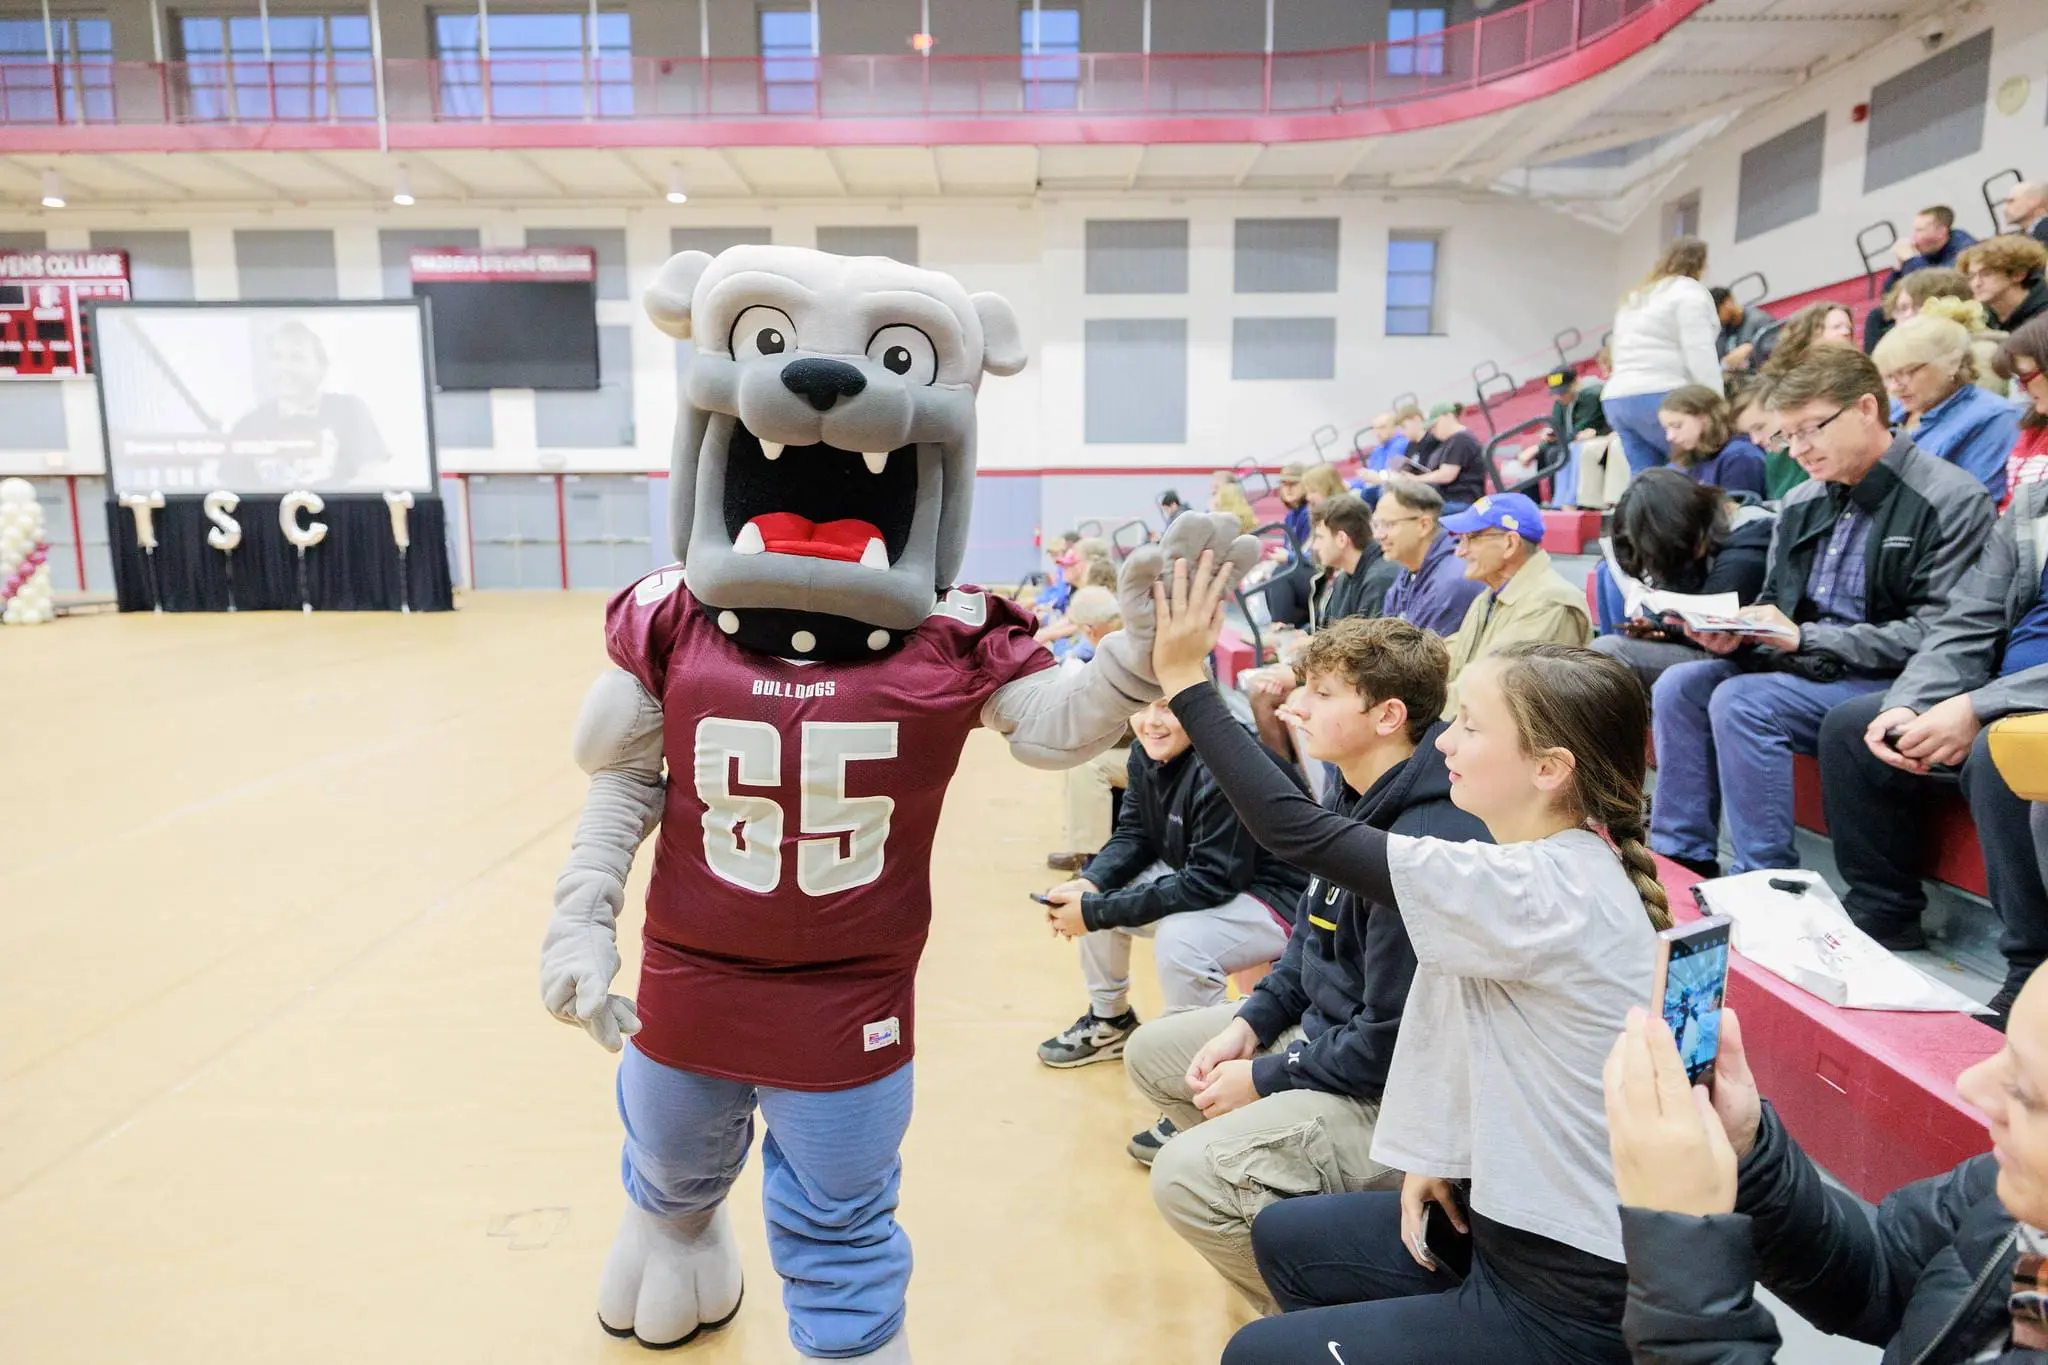 Champ the Bulldog giving high fives to TSCT students sitting in the stands at the Multipurpose Activity Center (MAC)